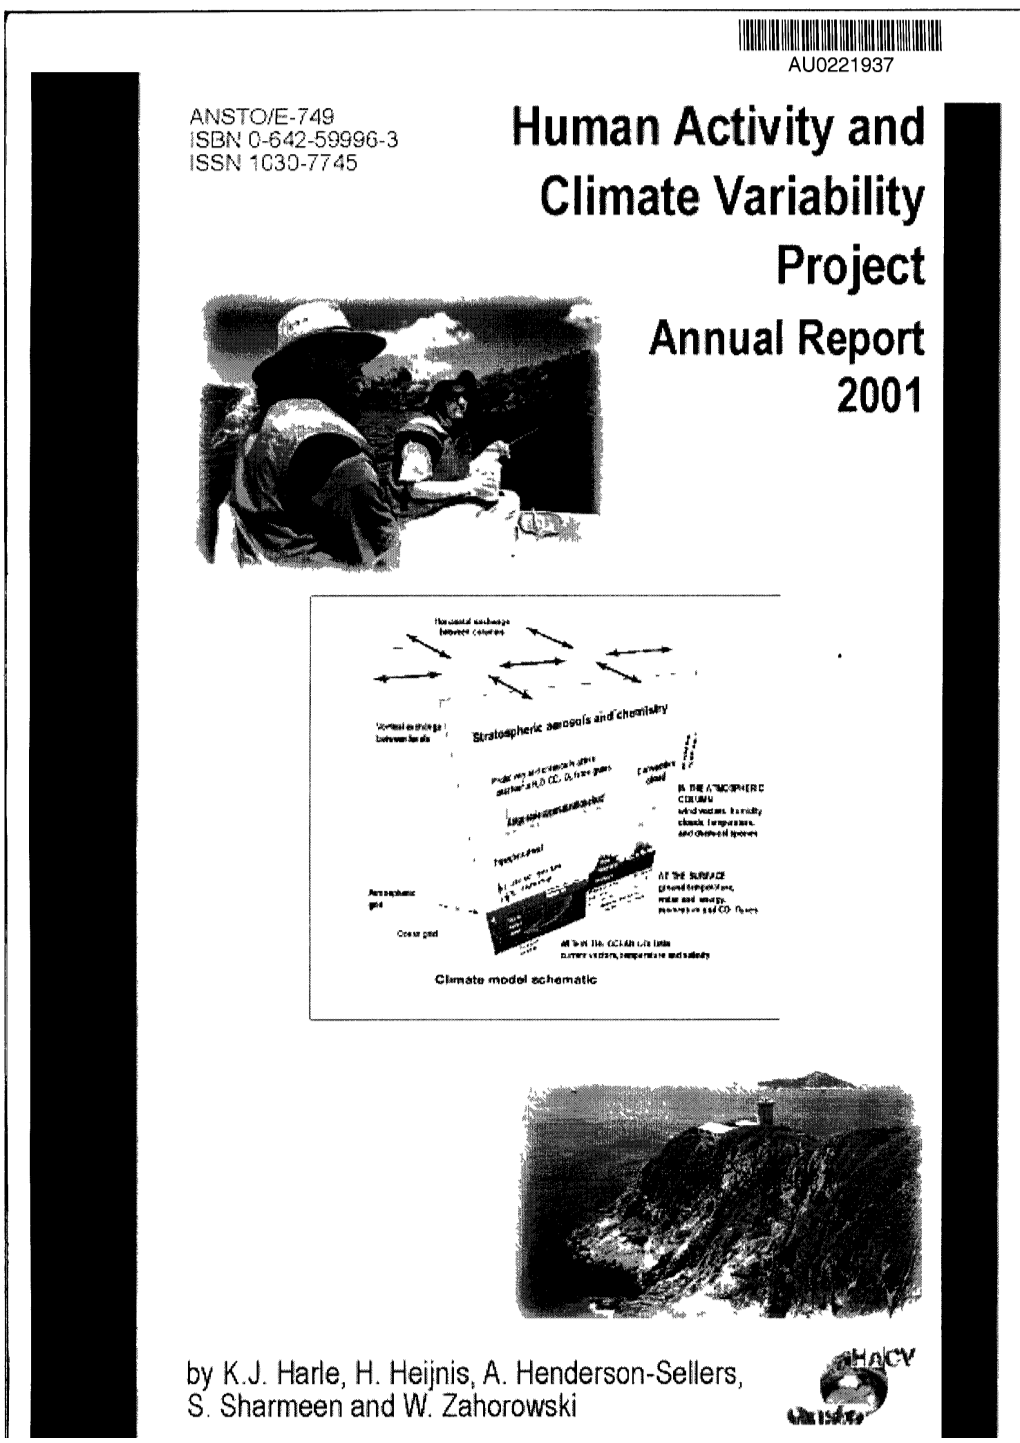 Human Activity and Climate Variability Project: Annual Report 2001